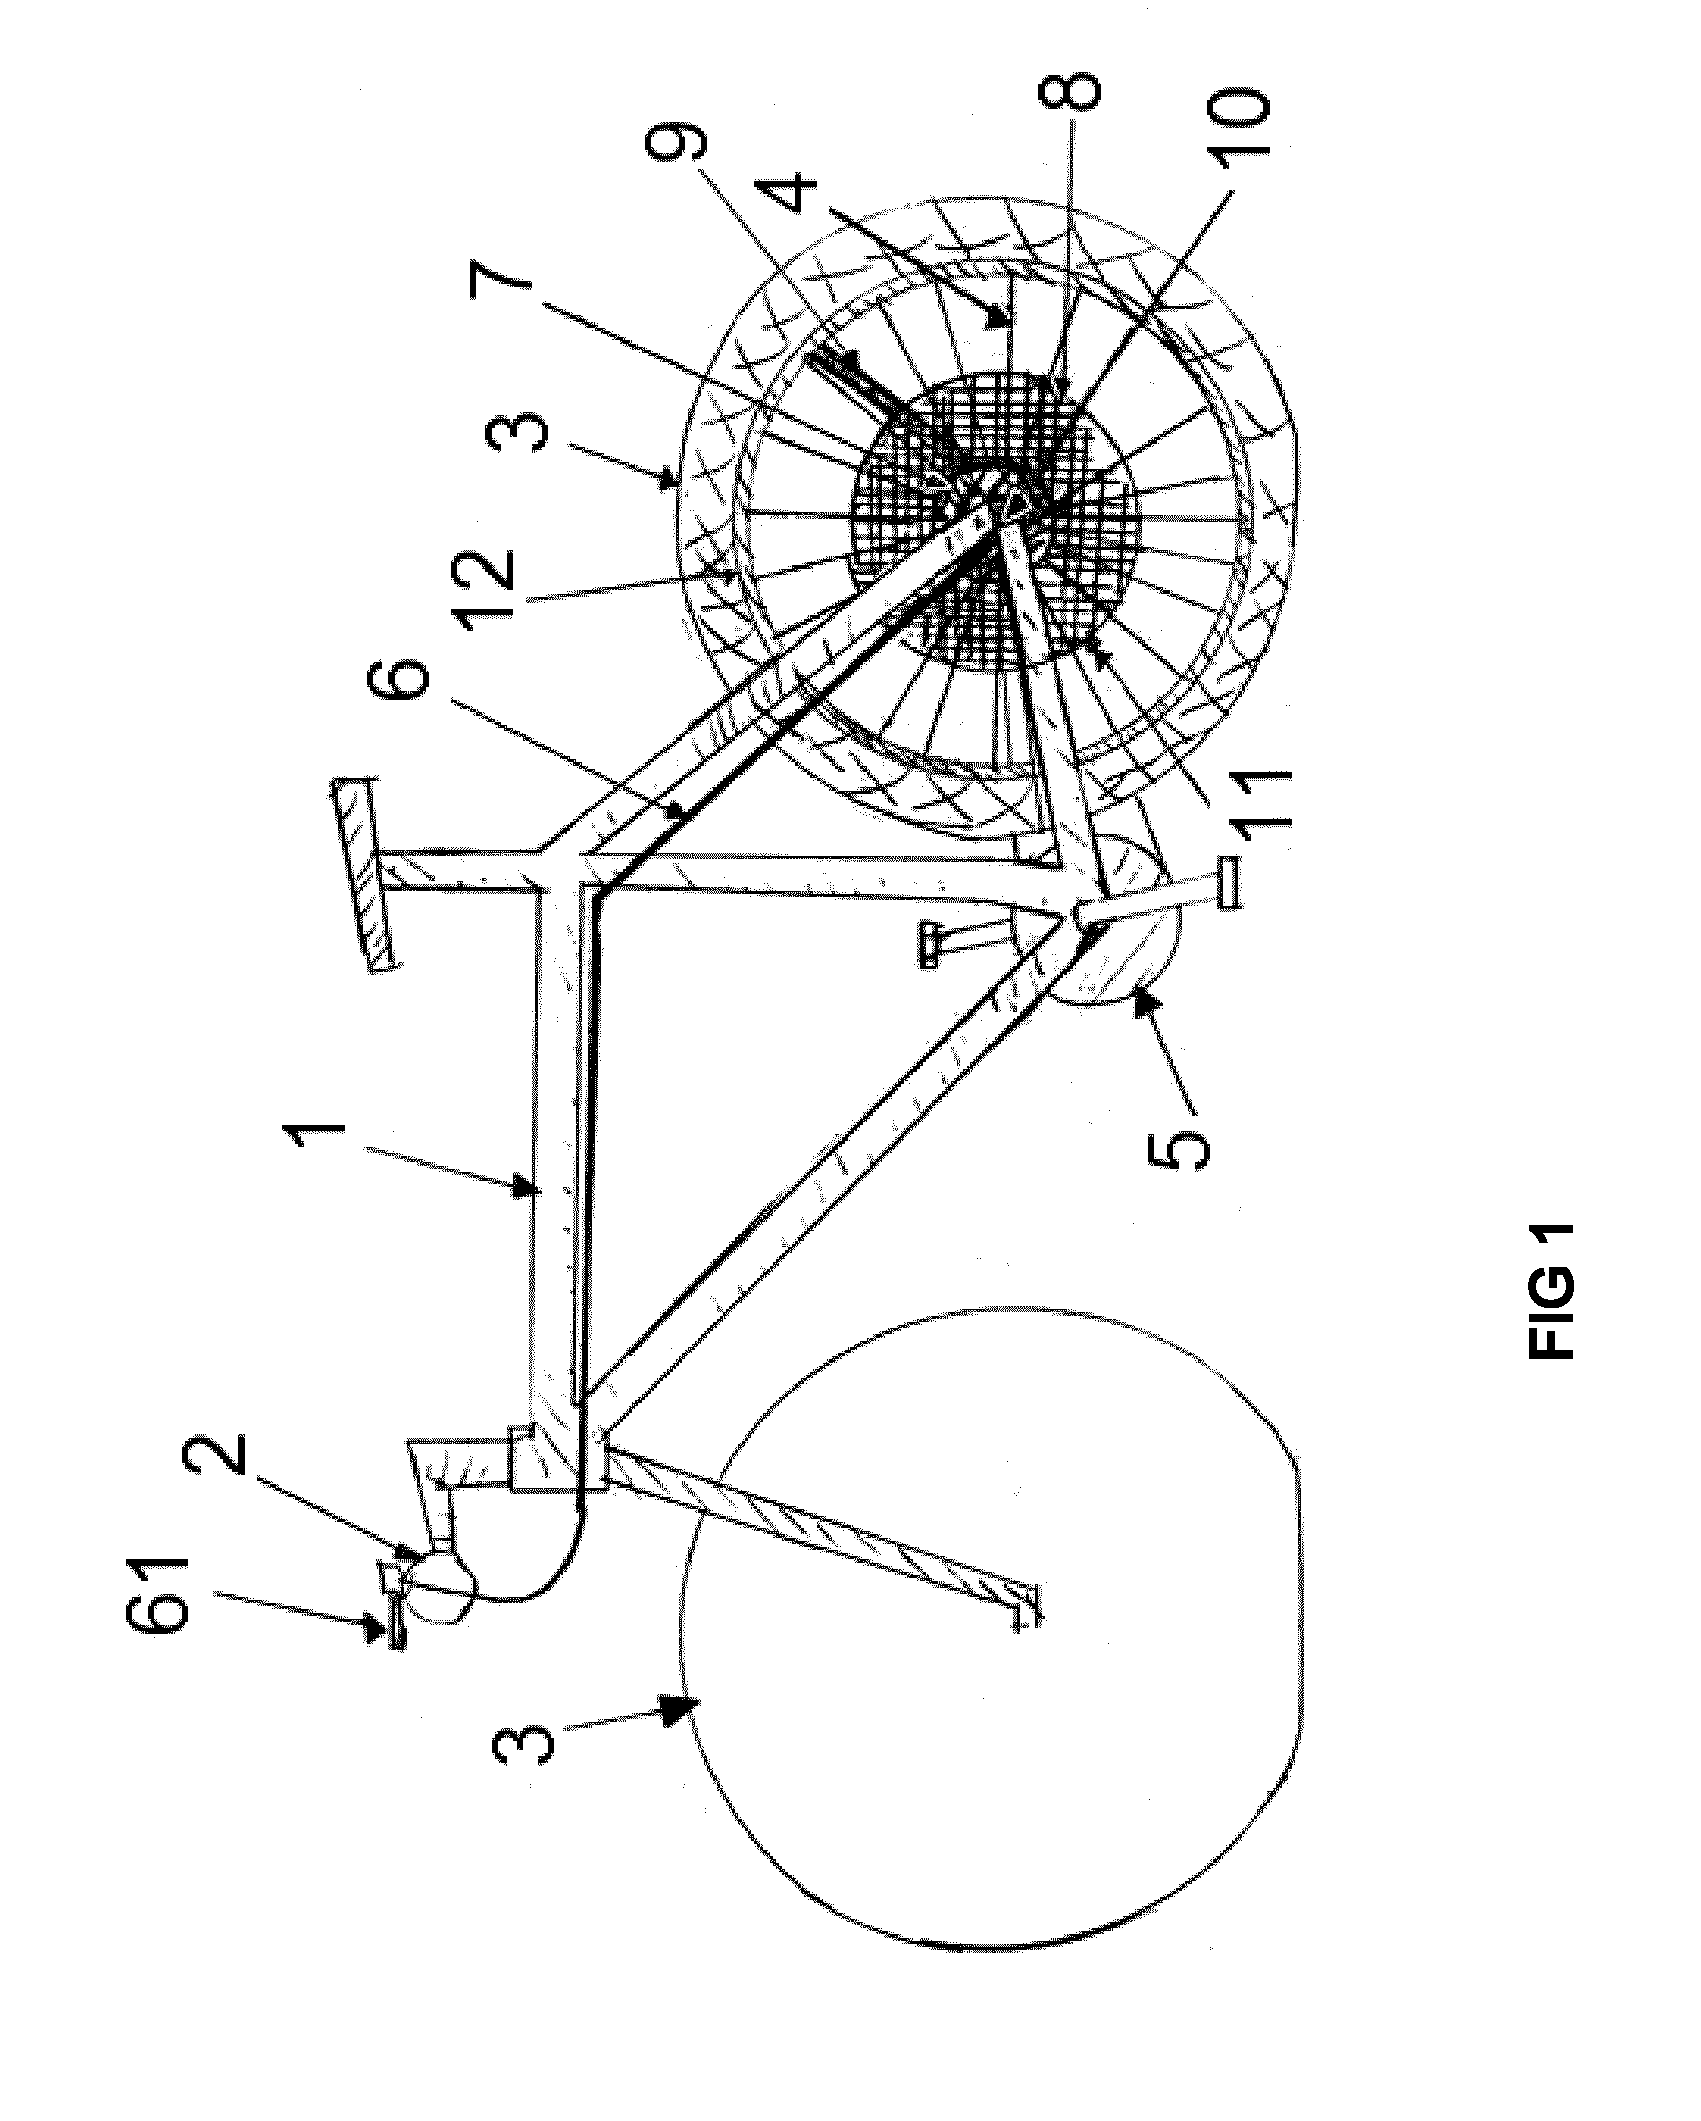 Dynamic tire pressure regulator for bicycles